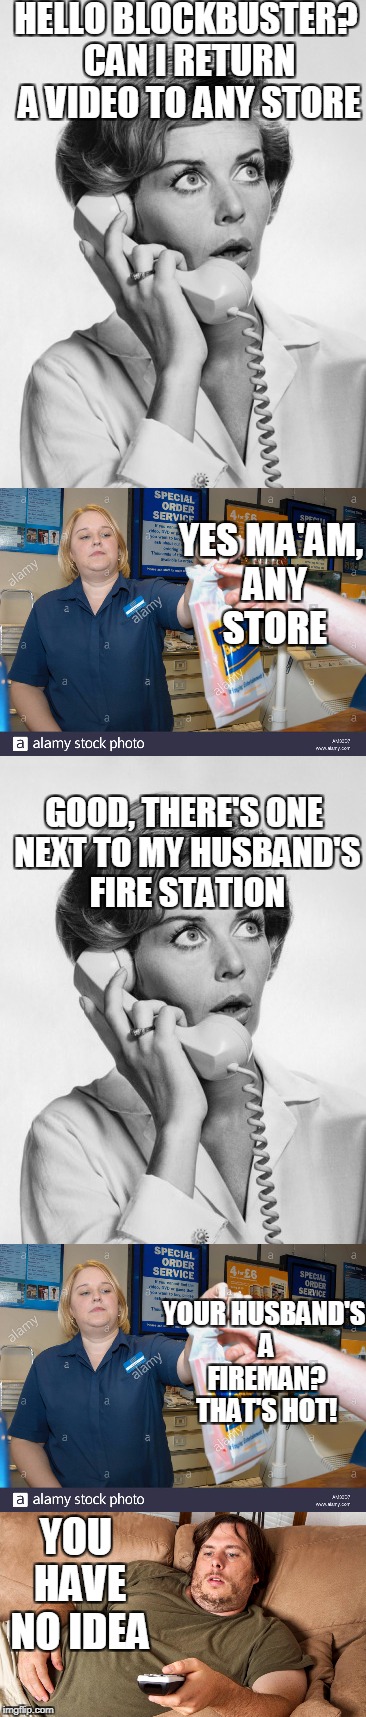 True story | HELLO BLOCKBUSTER? CAN I RETURN A VIDEO TO ANY STORE; YES MA'AM, ANY STORE; GOOD, THERE'S ONE NEXT TO MY HUSBAND'S FIRE STATION; YOUR HUSBAND'S A FIREMAN? THAT'S HOT! YOU HAVE NO IDEA | image tagged in blockbuster | made w/ Imgflip meme maker